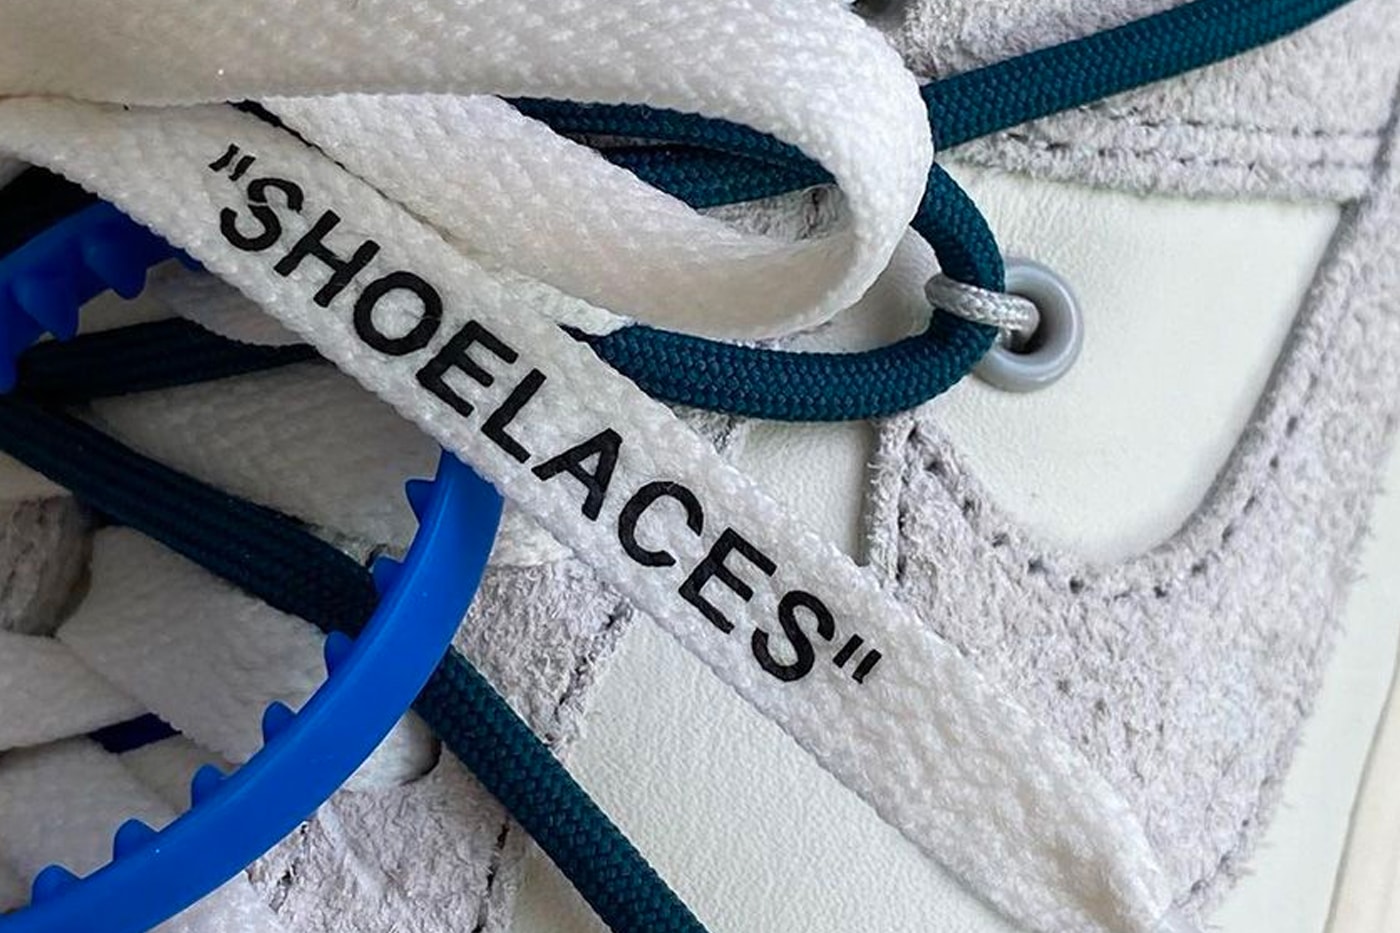 Off-White™ x Nike Dunk Low THE 50 16 of 50 Detailed Look